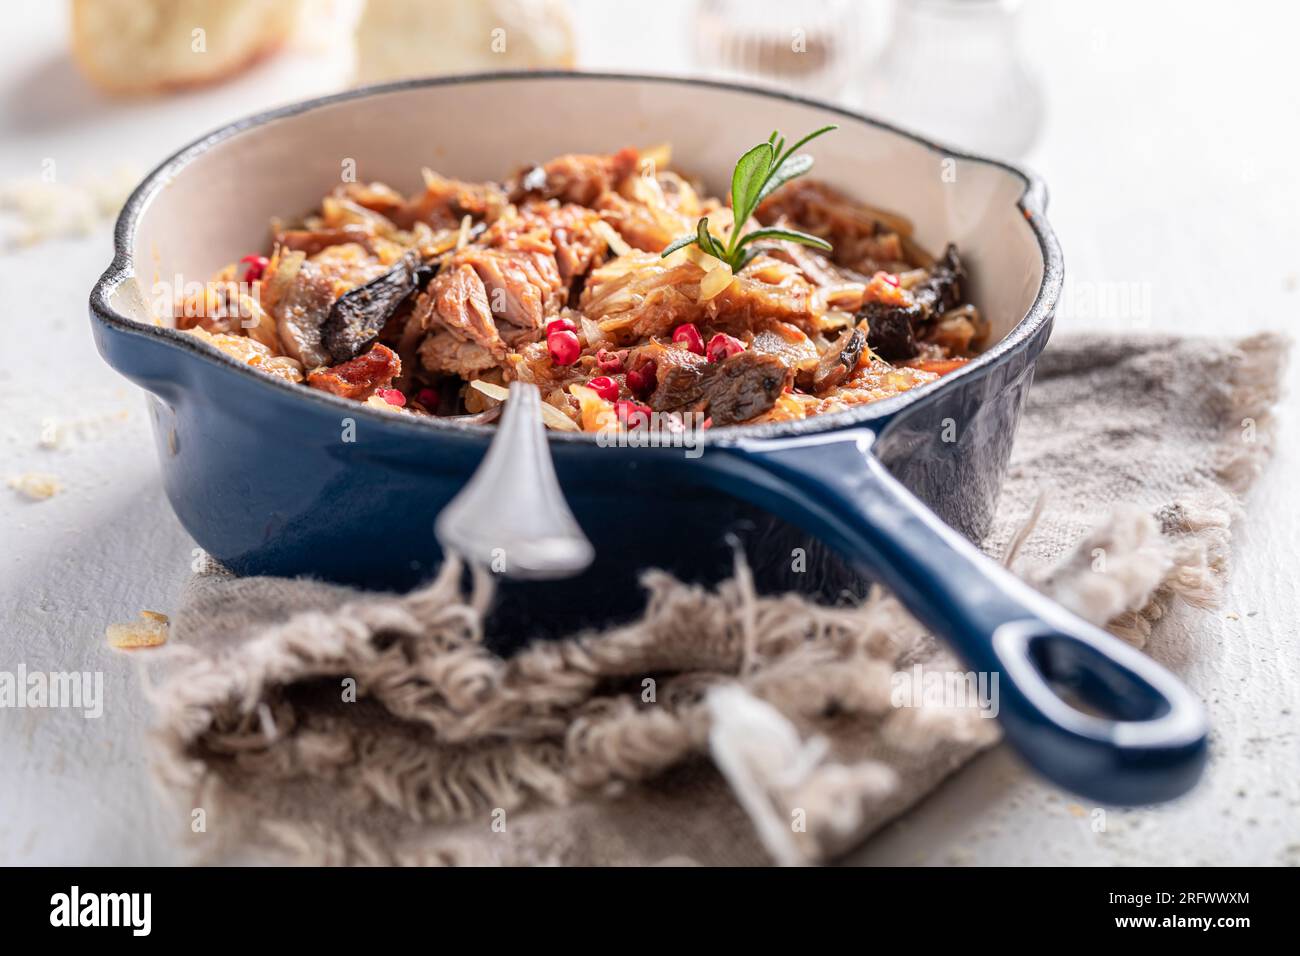 Spicy and homemade stew with sauerkraut, cabbage and spices. Bigos is traditional Polish food. Stock Photo